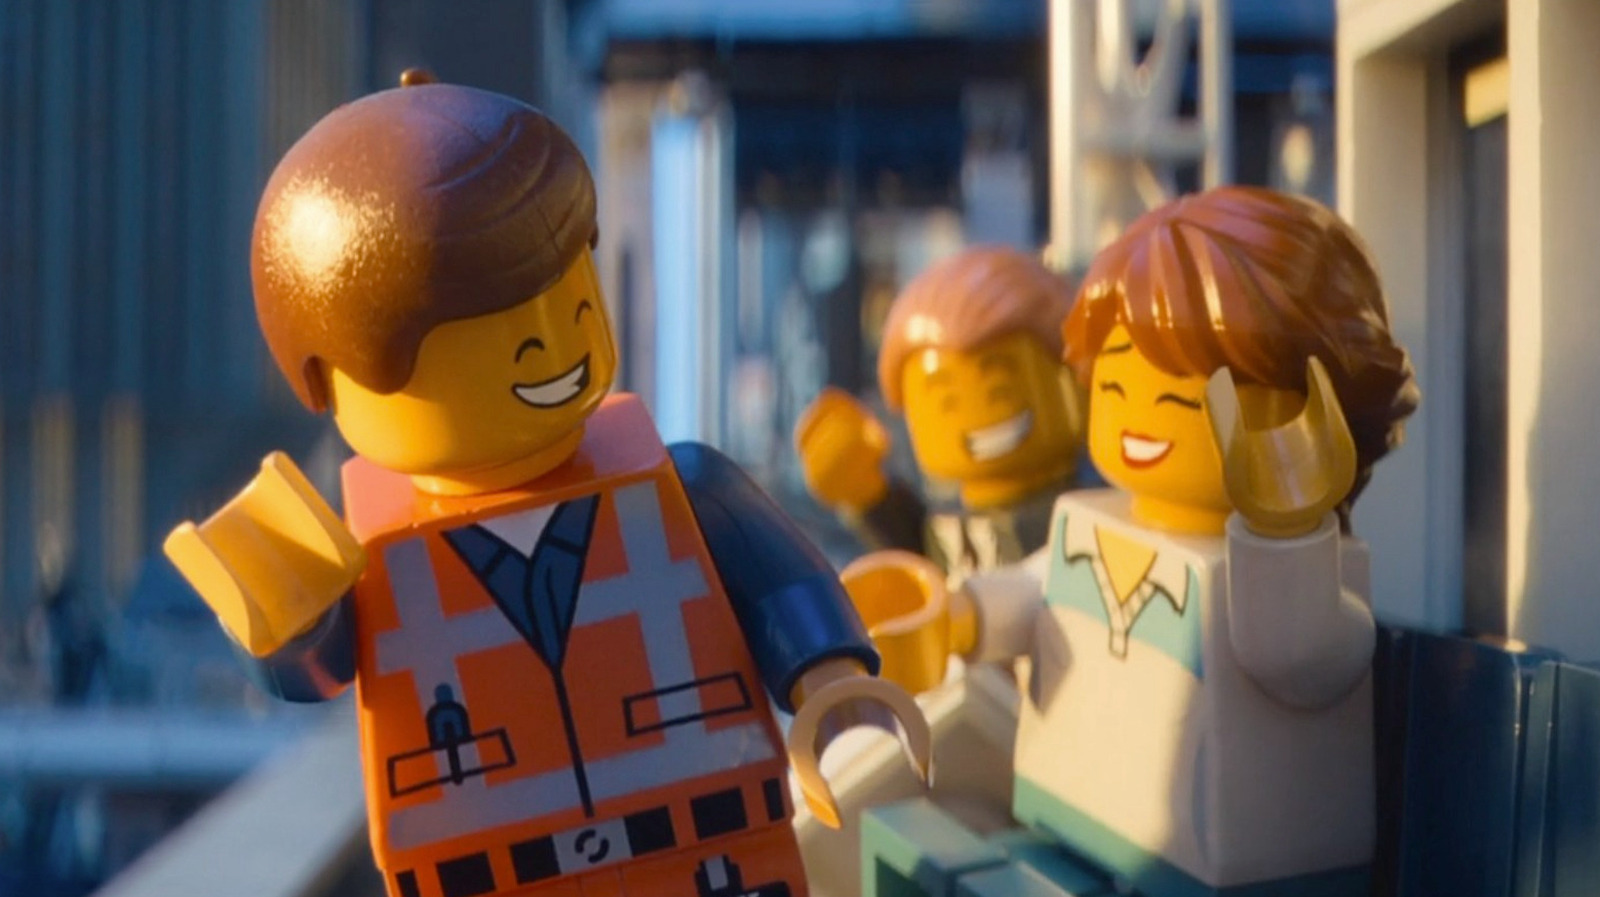 The Daily Stream: The LEGO Movie Shows Us That Everything Is Awesome When  You Make Time To Play